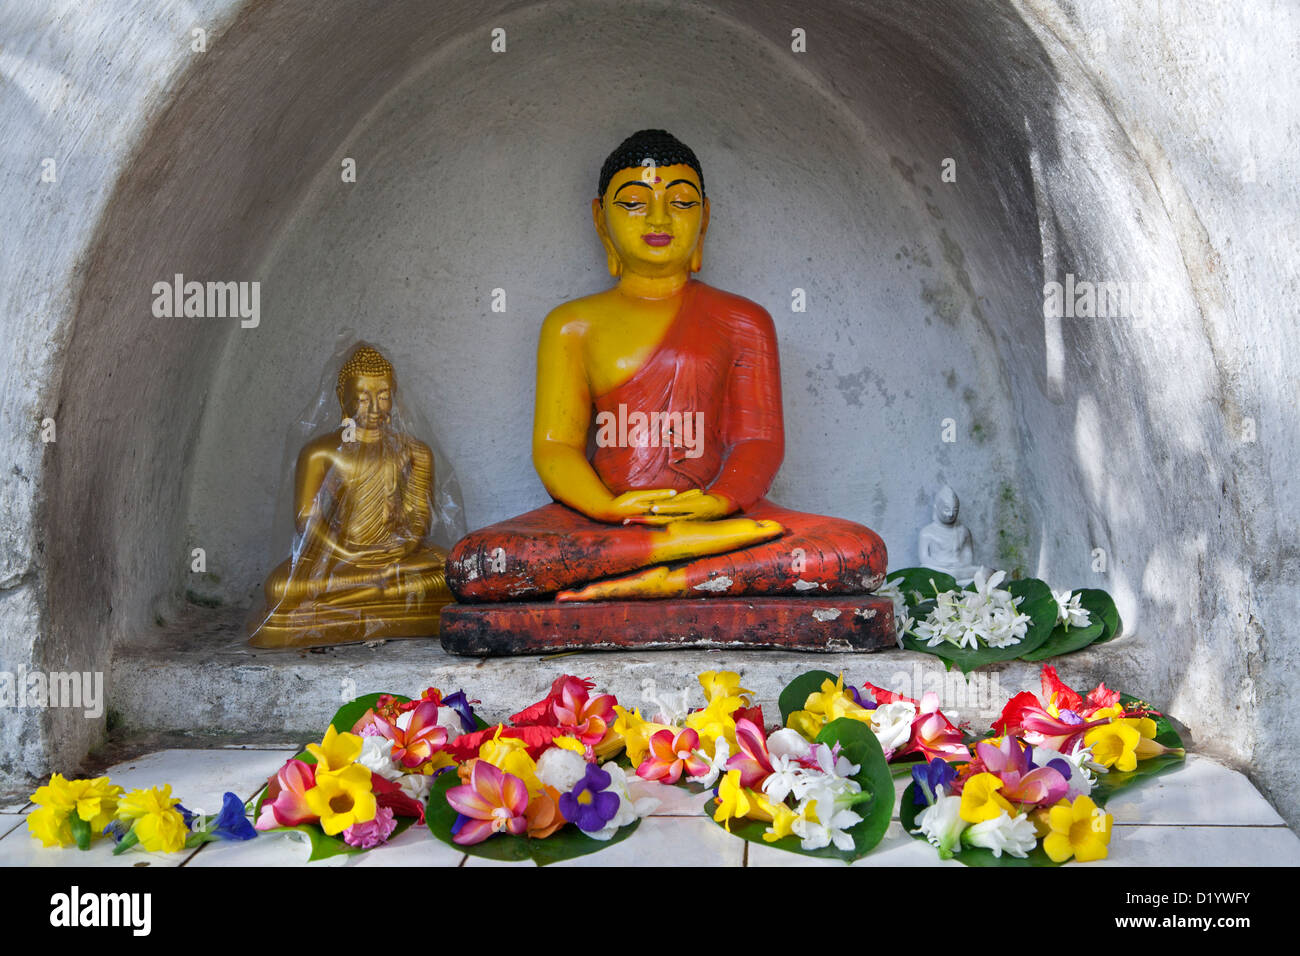 Buddha sculpture and flower offerings. Temple of the Sacred Tooth Relic. Kandy. Sri Lanka Stock Photo